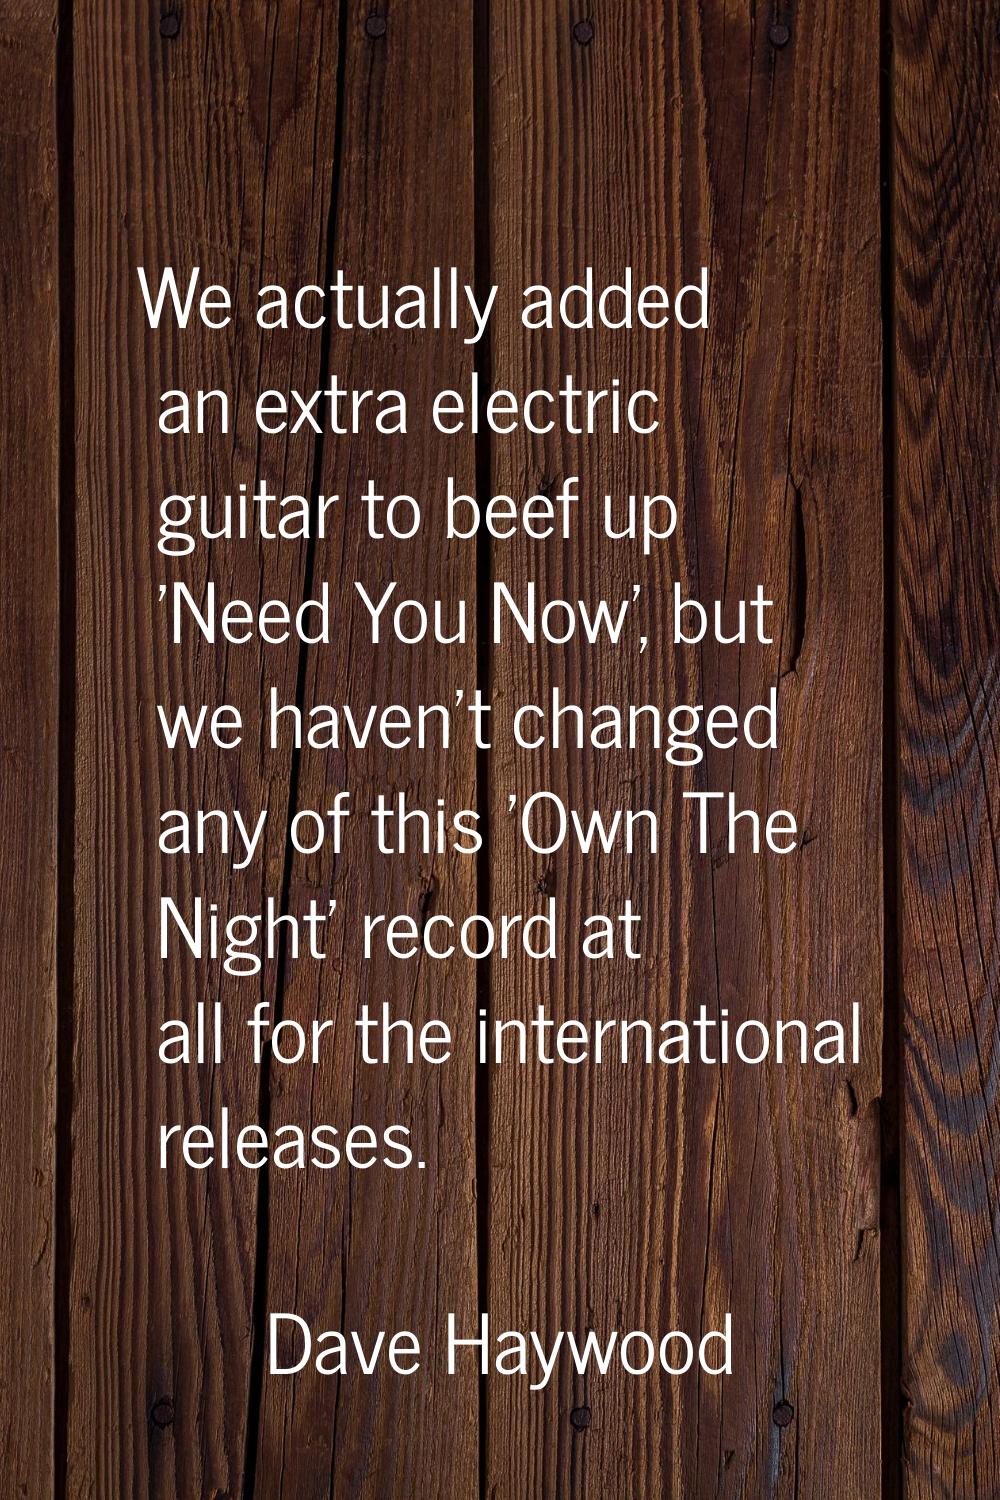 We actually added an extra electric guitar to beef up 'Need You Now', but we haven't changed any of